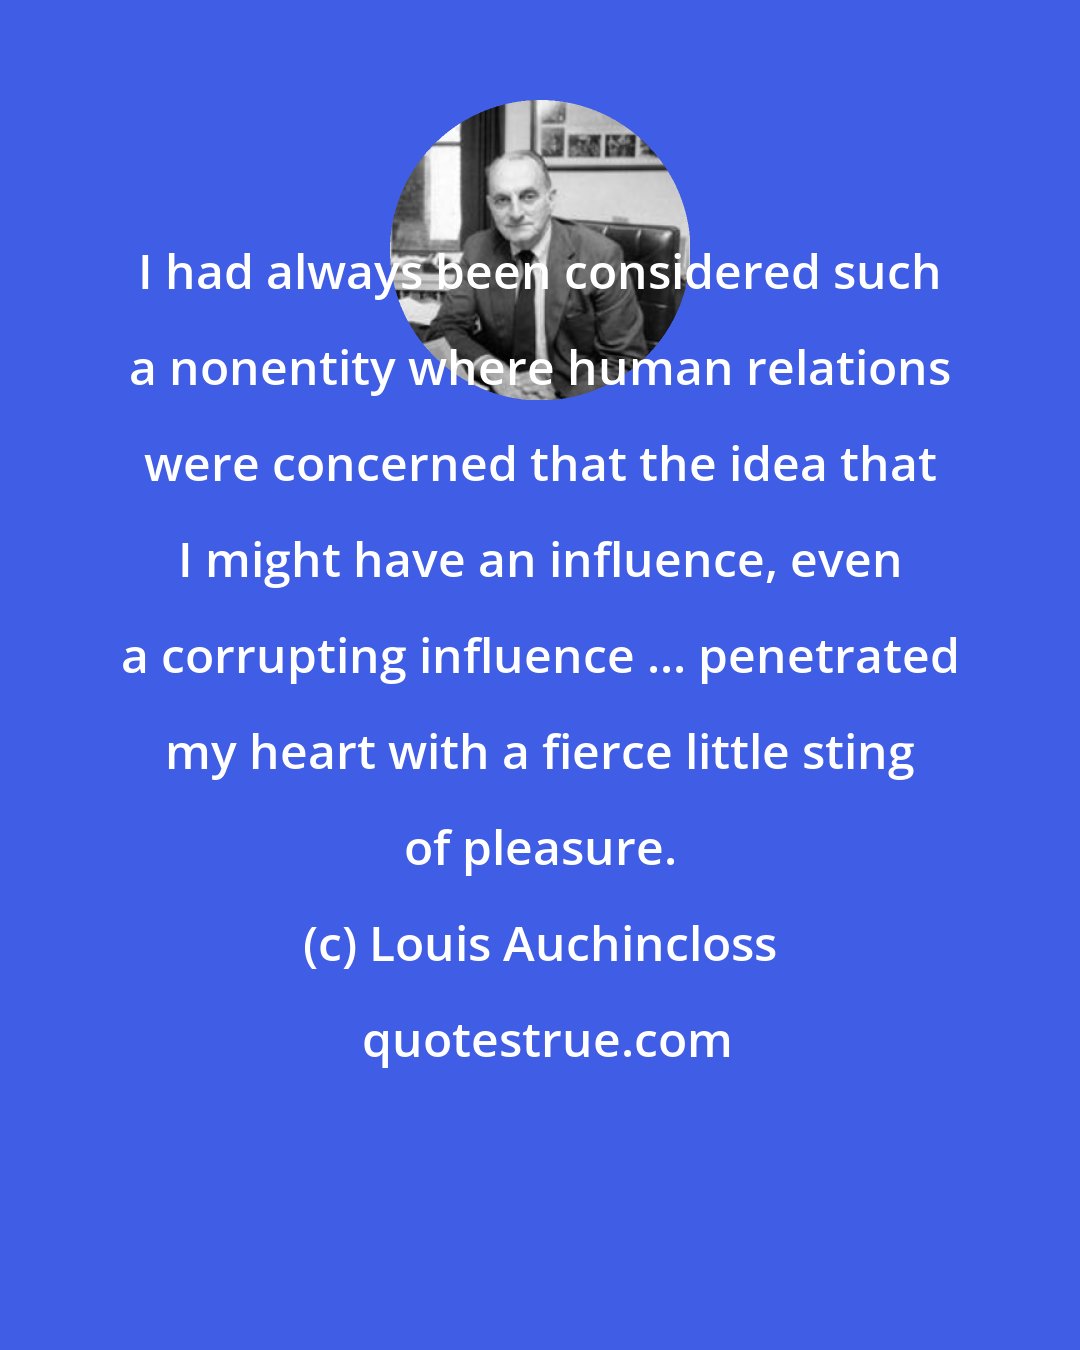 Louis Auchincloss: I had always been considered such a nonentity where human relations were concerned that the idea that I might have an influence, even a corrupting influence ... penetrated my heart with a fierce little sting of pleasure.